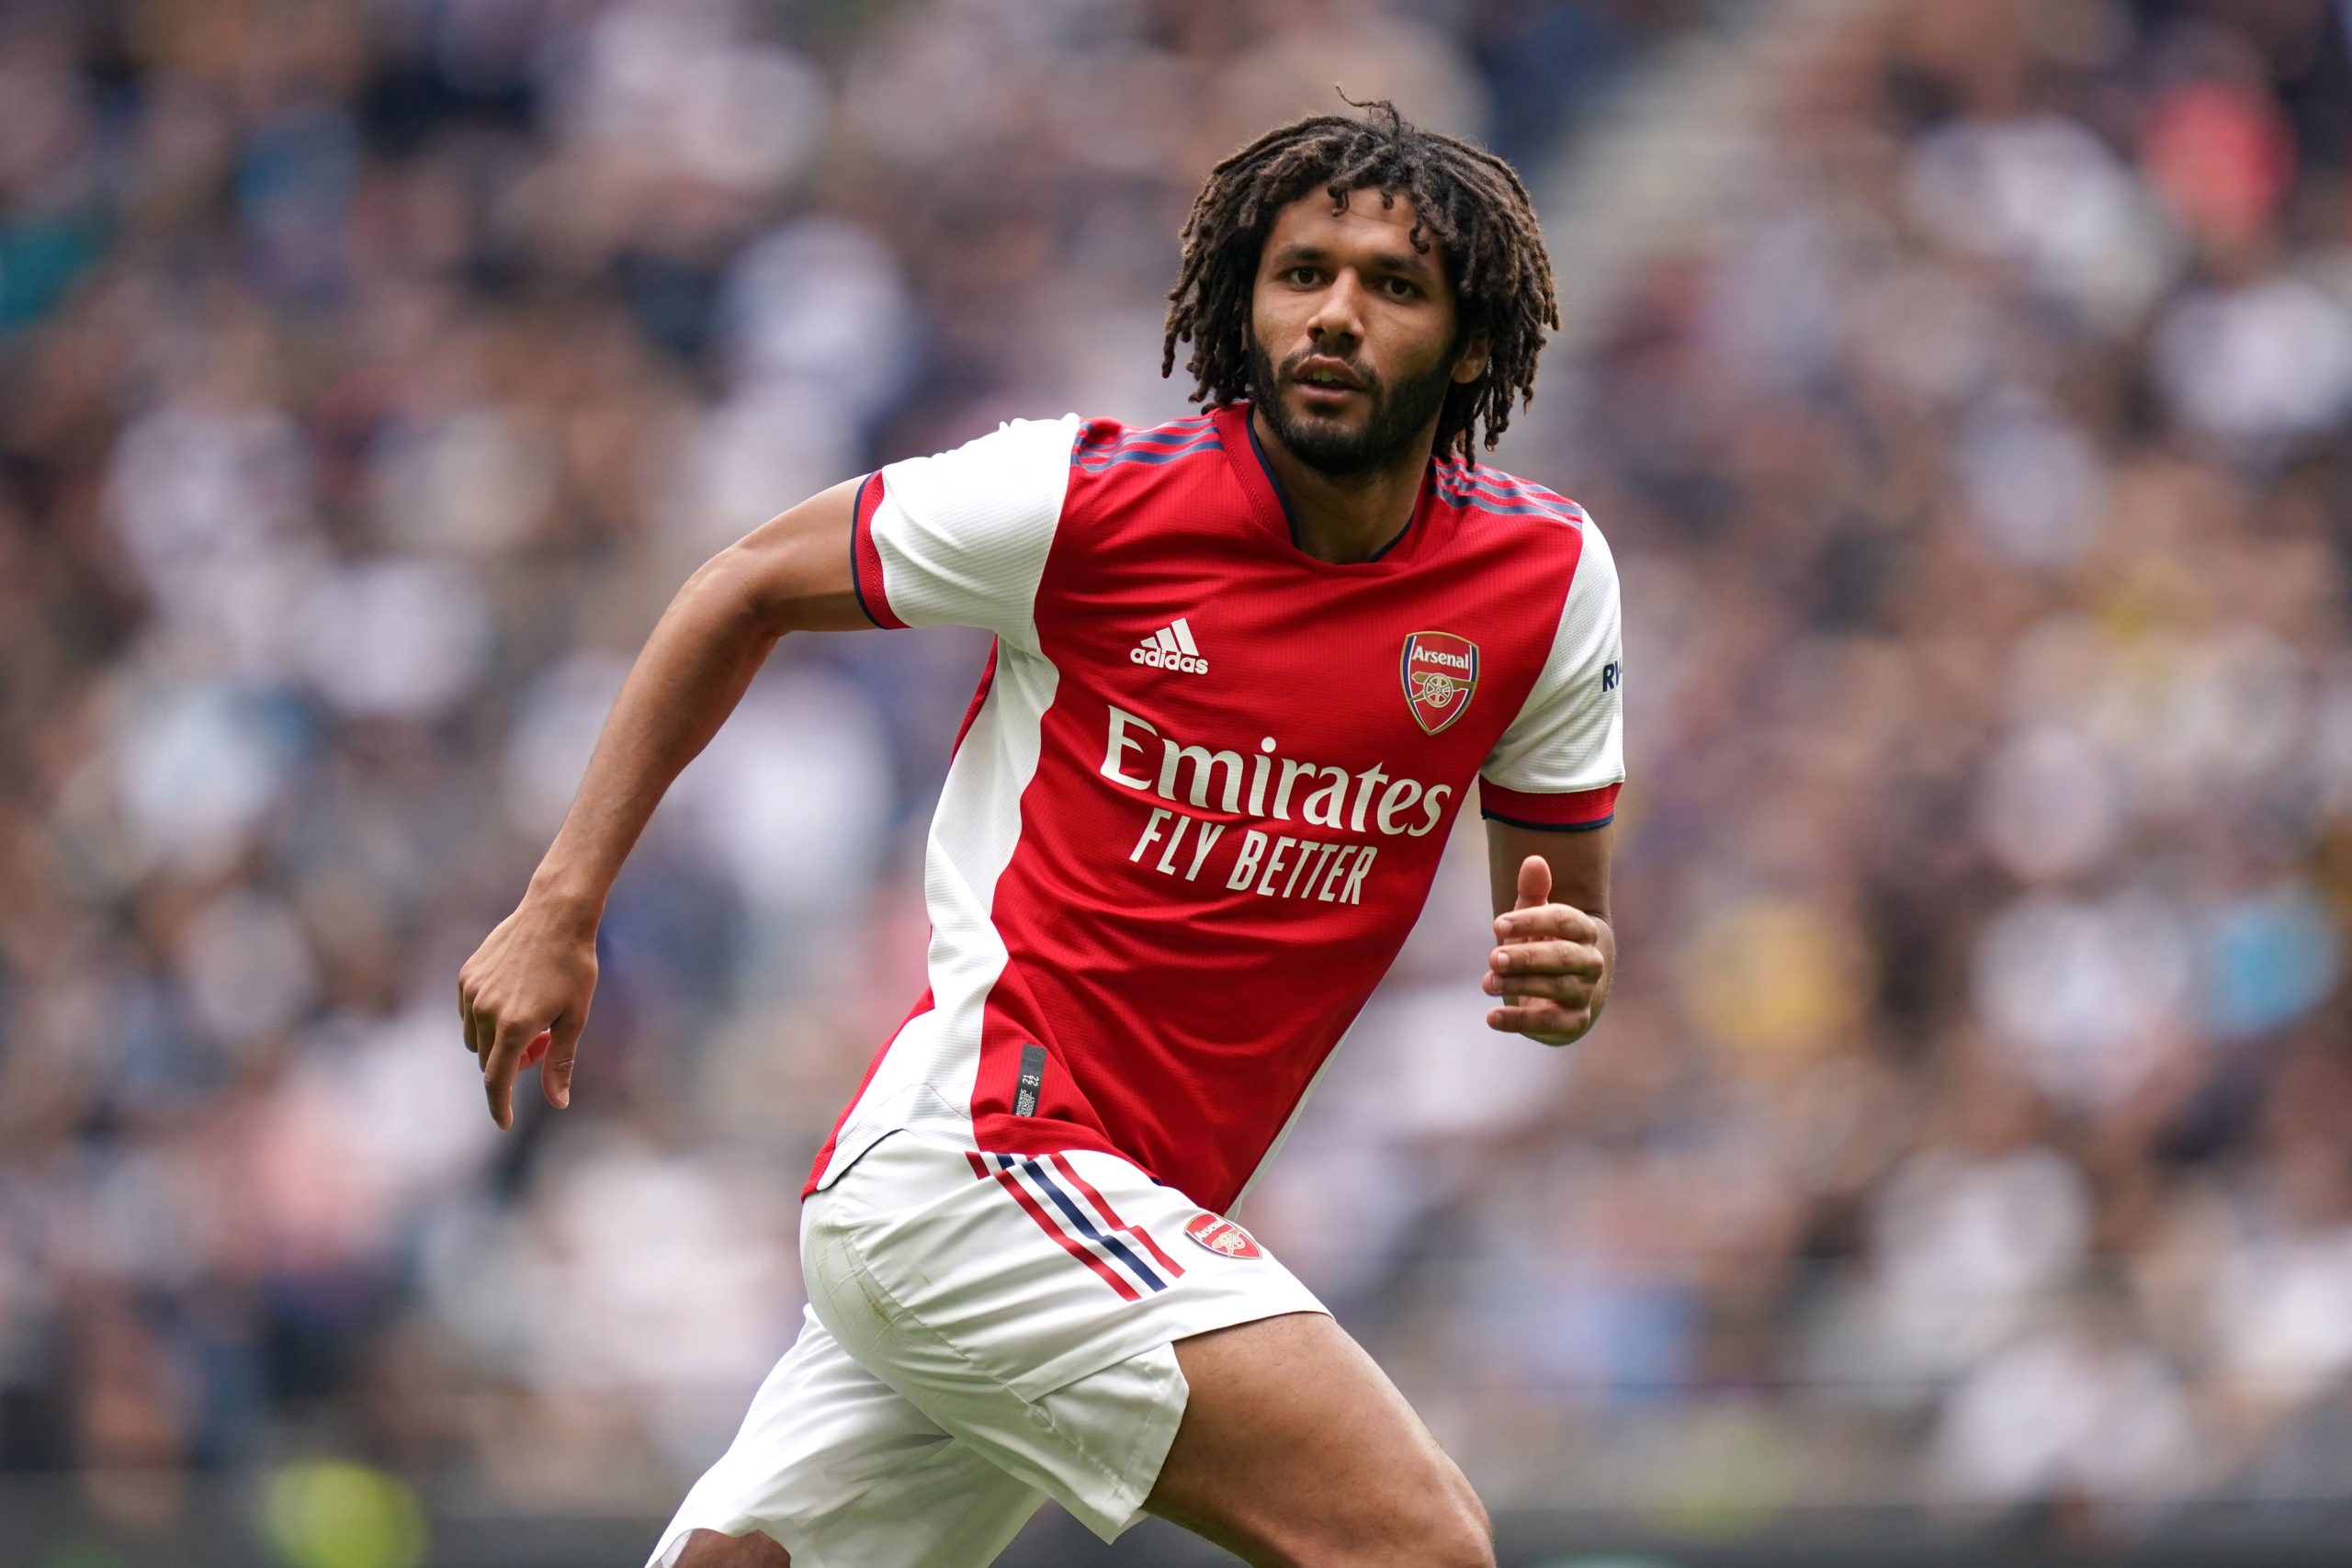 Mohamed Elneny is a Player Who is Part of Arsenal's Team Under the Guidance of Mikel Arteta